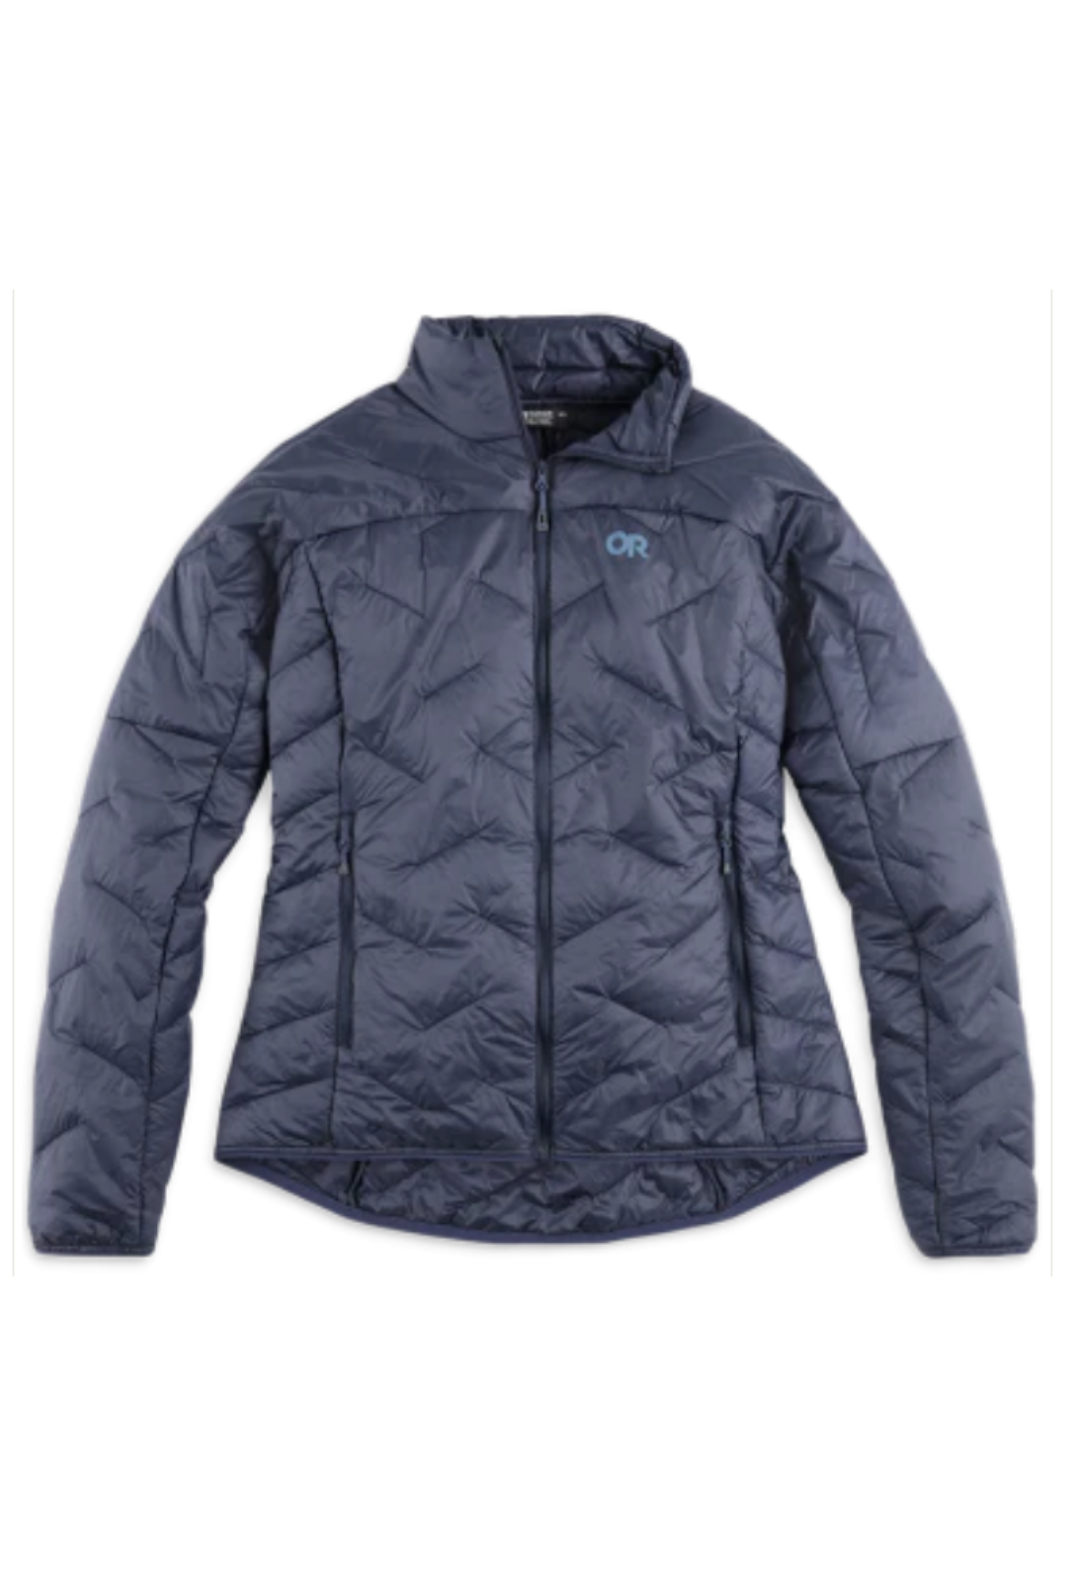 Outdoor Research Plus Size SuperStrand LT Jacket